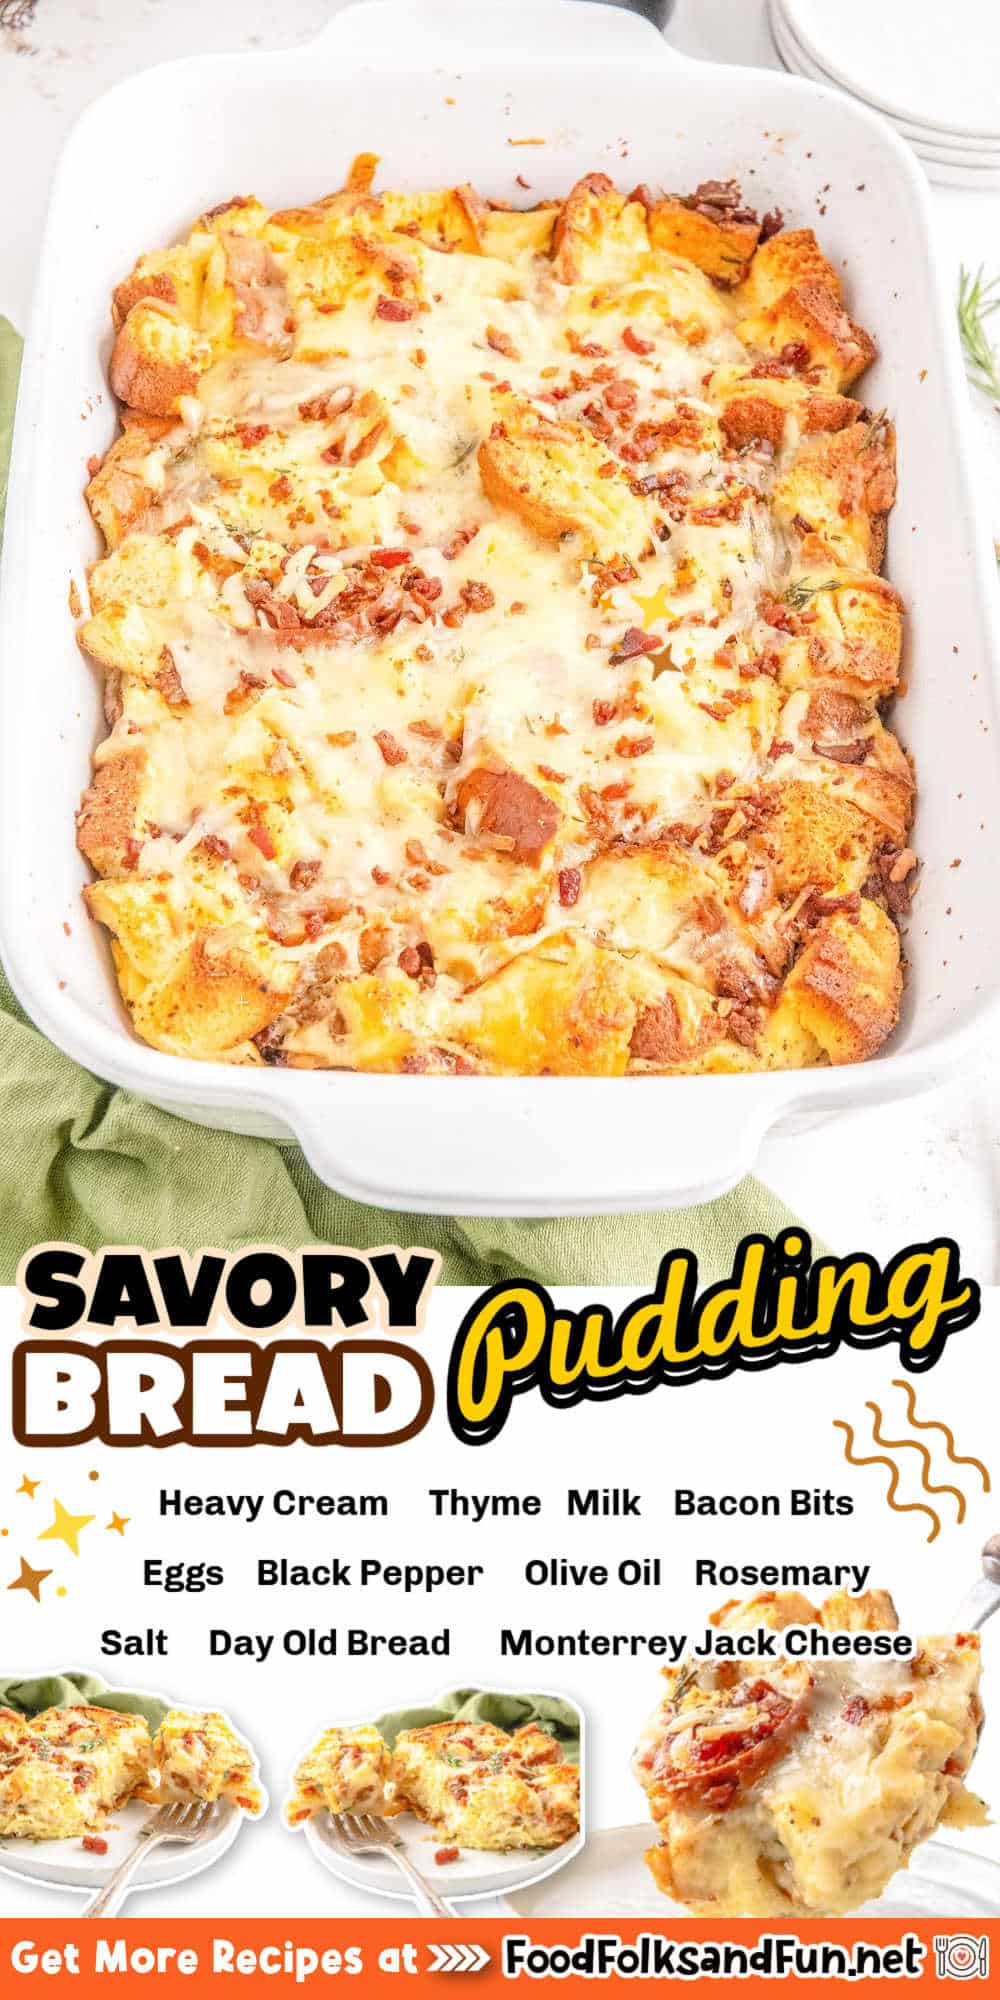 This Savory Bread Pudding recipe is filled with fresh herbs and spices. It’s studded with melted Monterey jack cheese and bacon bits throughout. via @foodfolksandfun